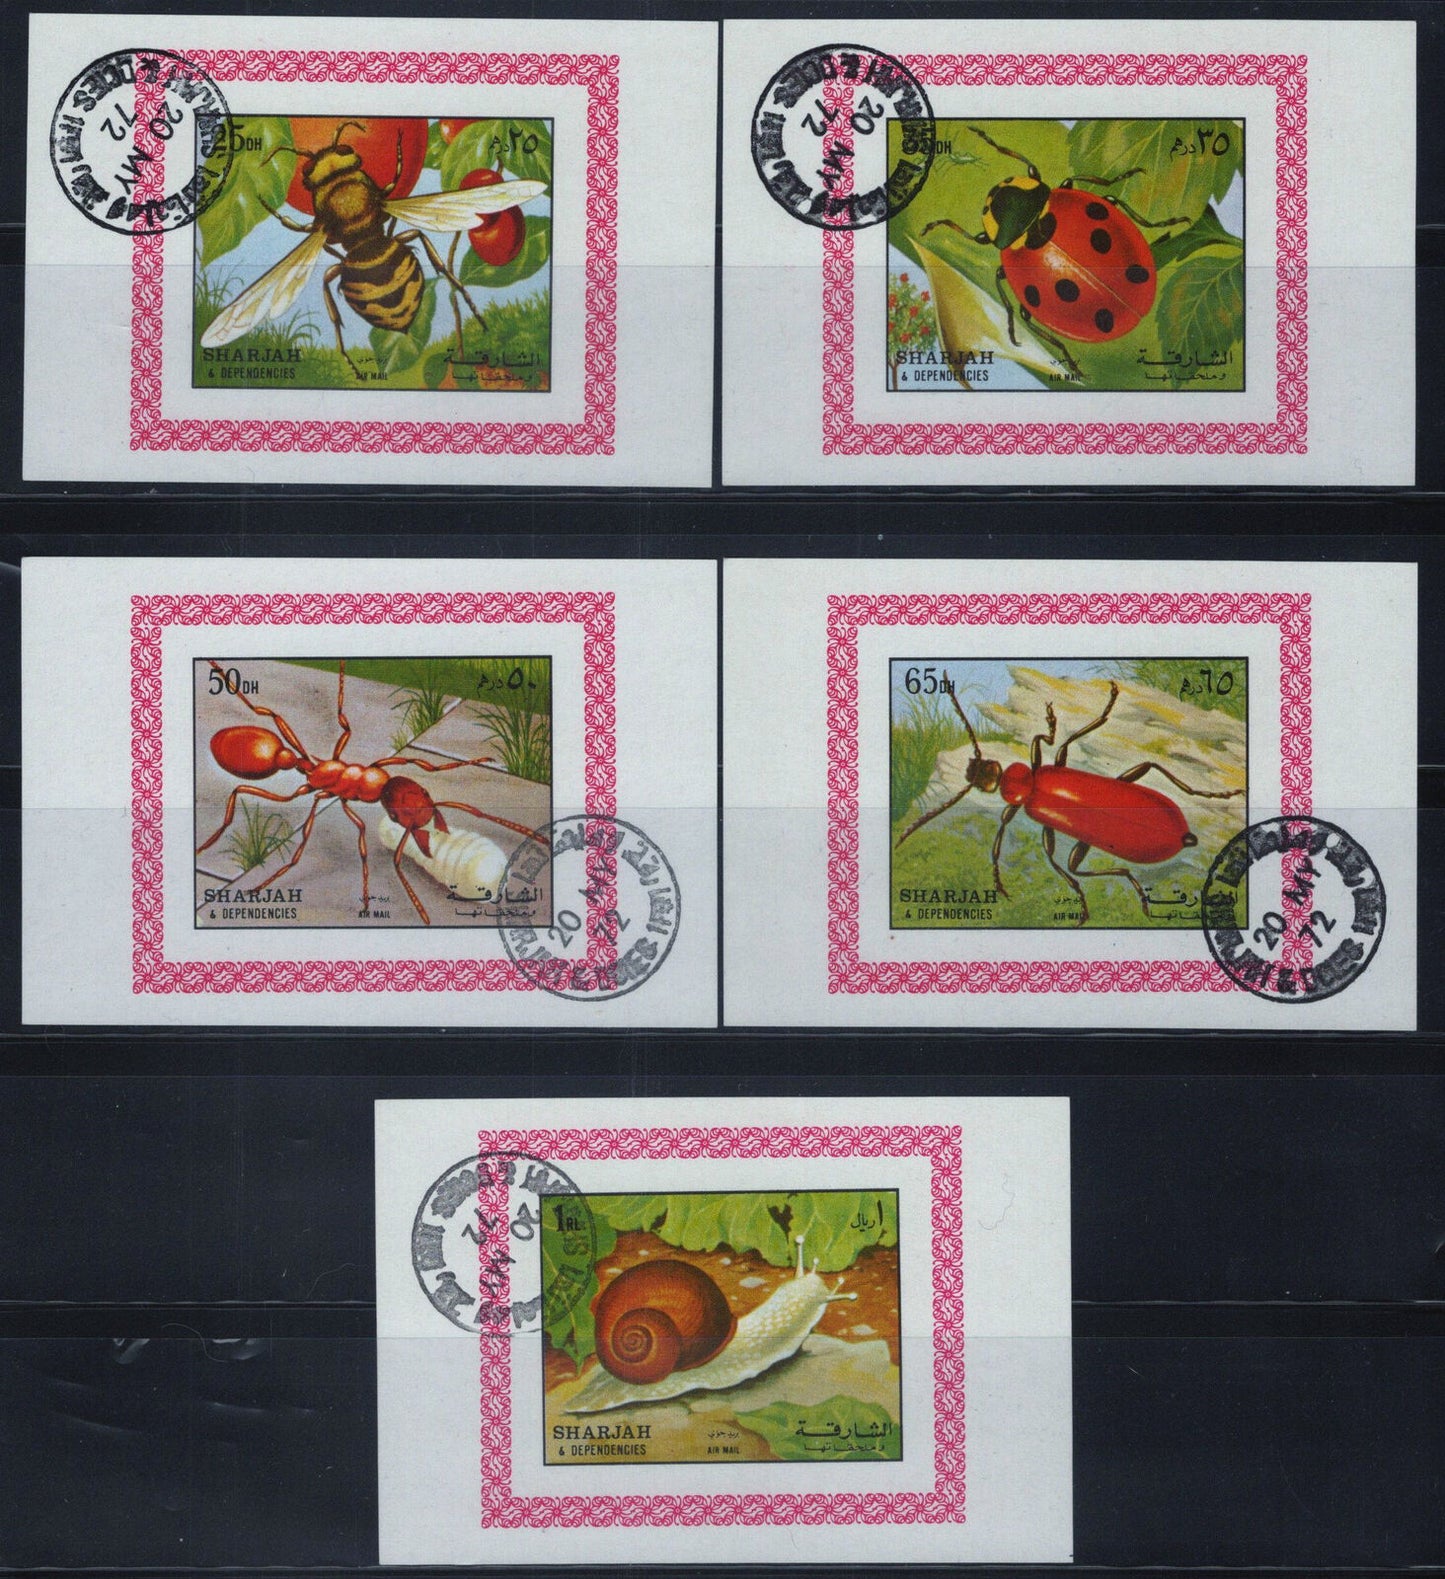 ZAYIX Sharjah 1204-1208 CTO Insects Nature Snails Bees Ladybugs Ants 013123S107